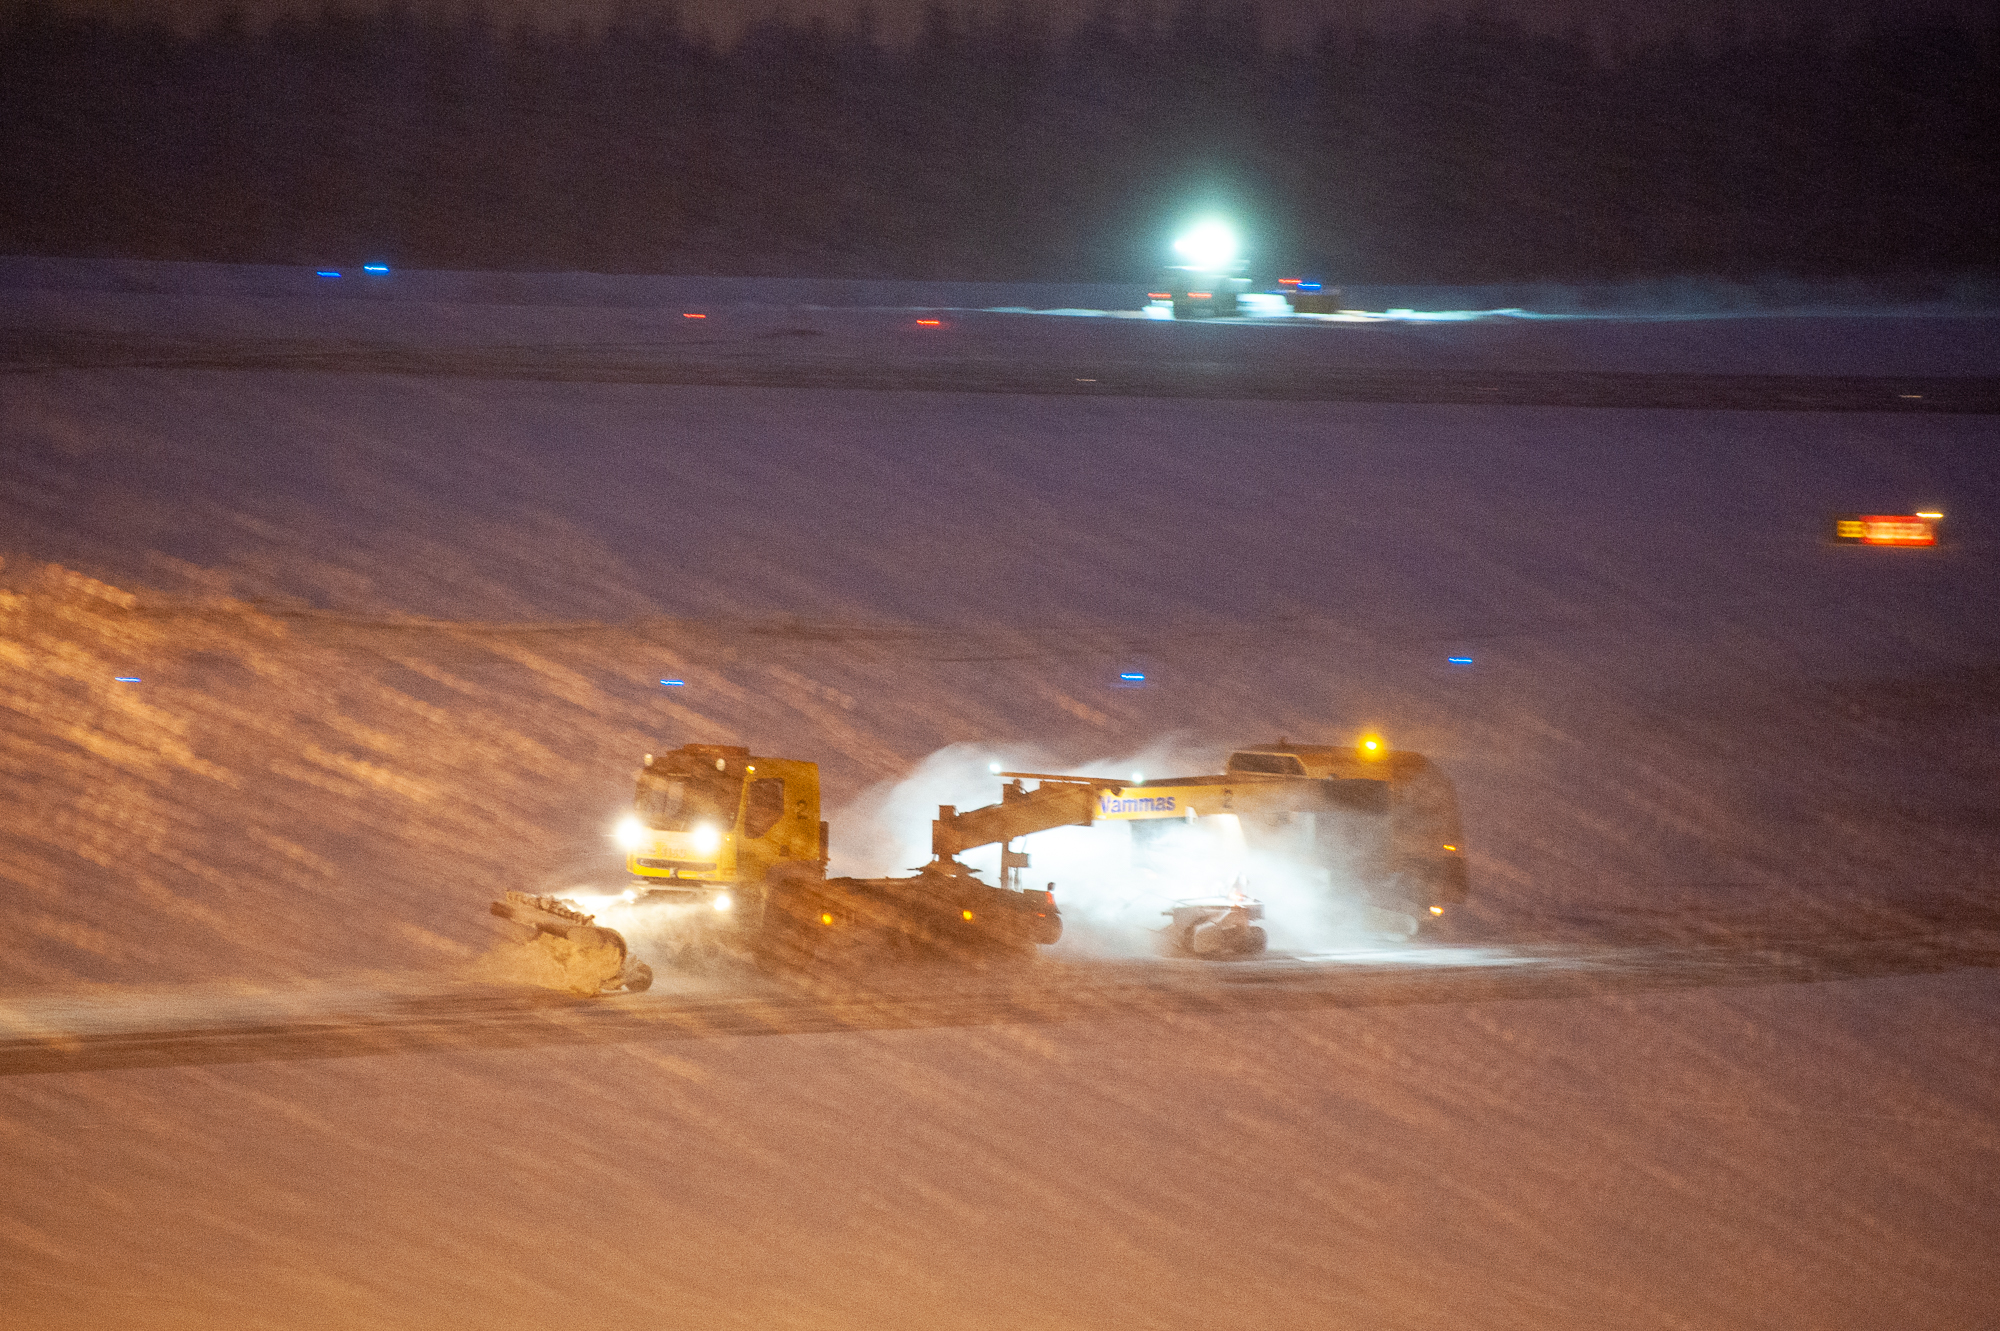 Snow removal from runway is needed for safe landing. Photo Heikki Juntti (FMI)